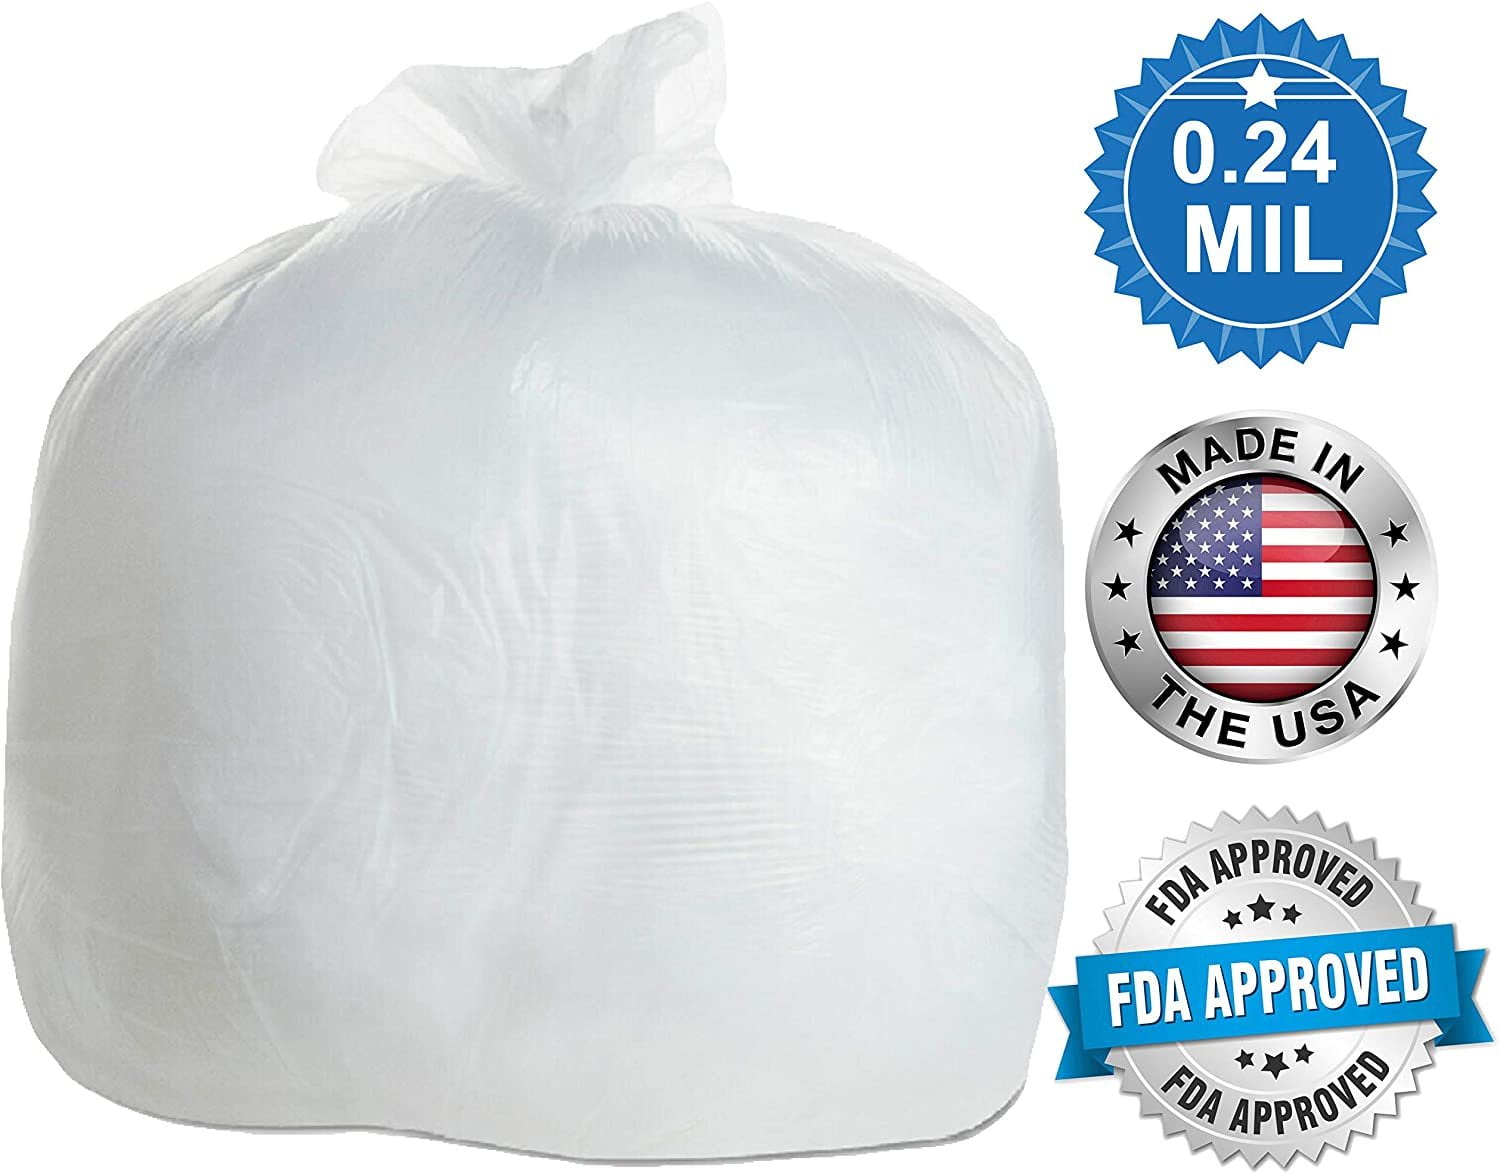 Glaro Clear Trash Can Liner Bags LB1000 (3 Sizes) Cases of 1000